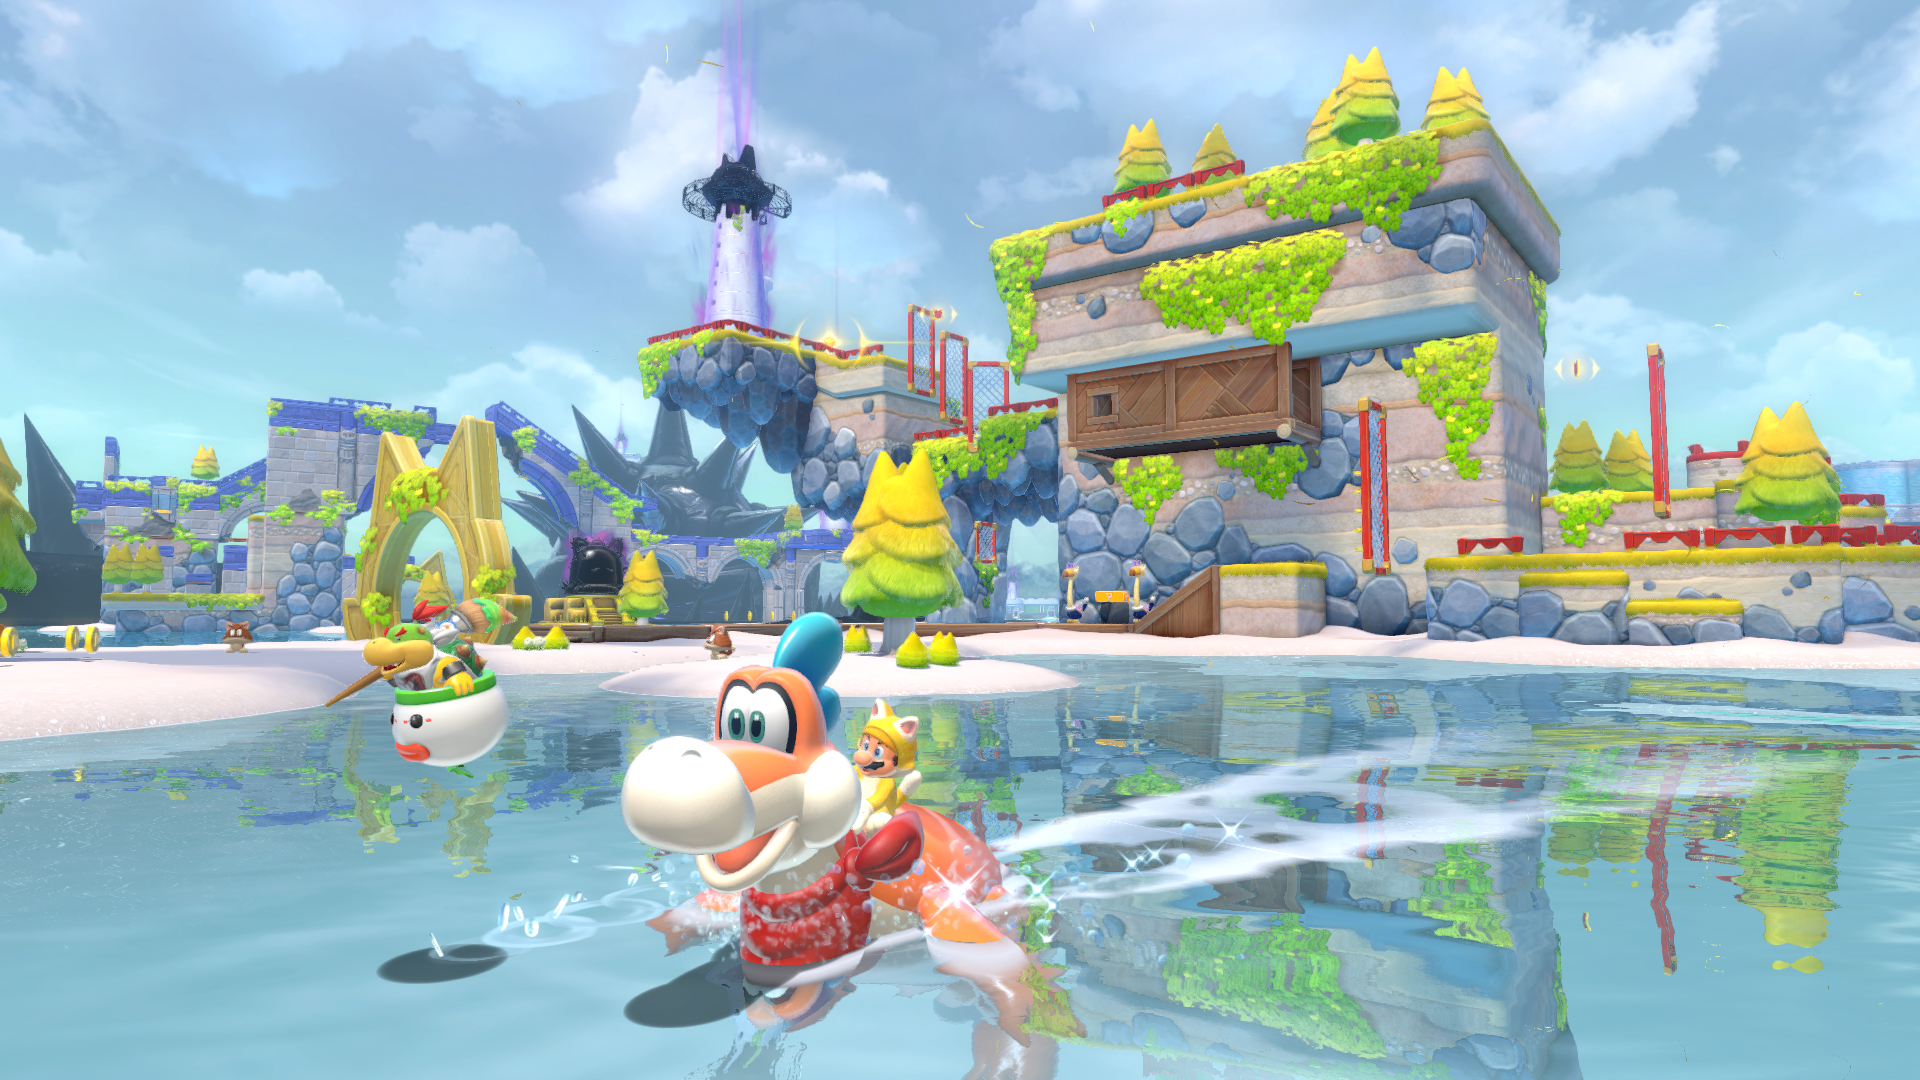 Super Mario 3D World + Bowser's Fury full site open, new details and art